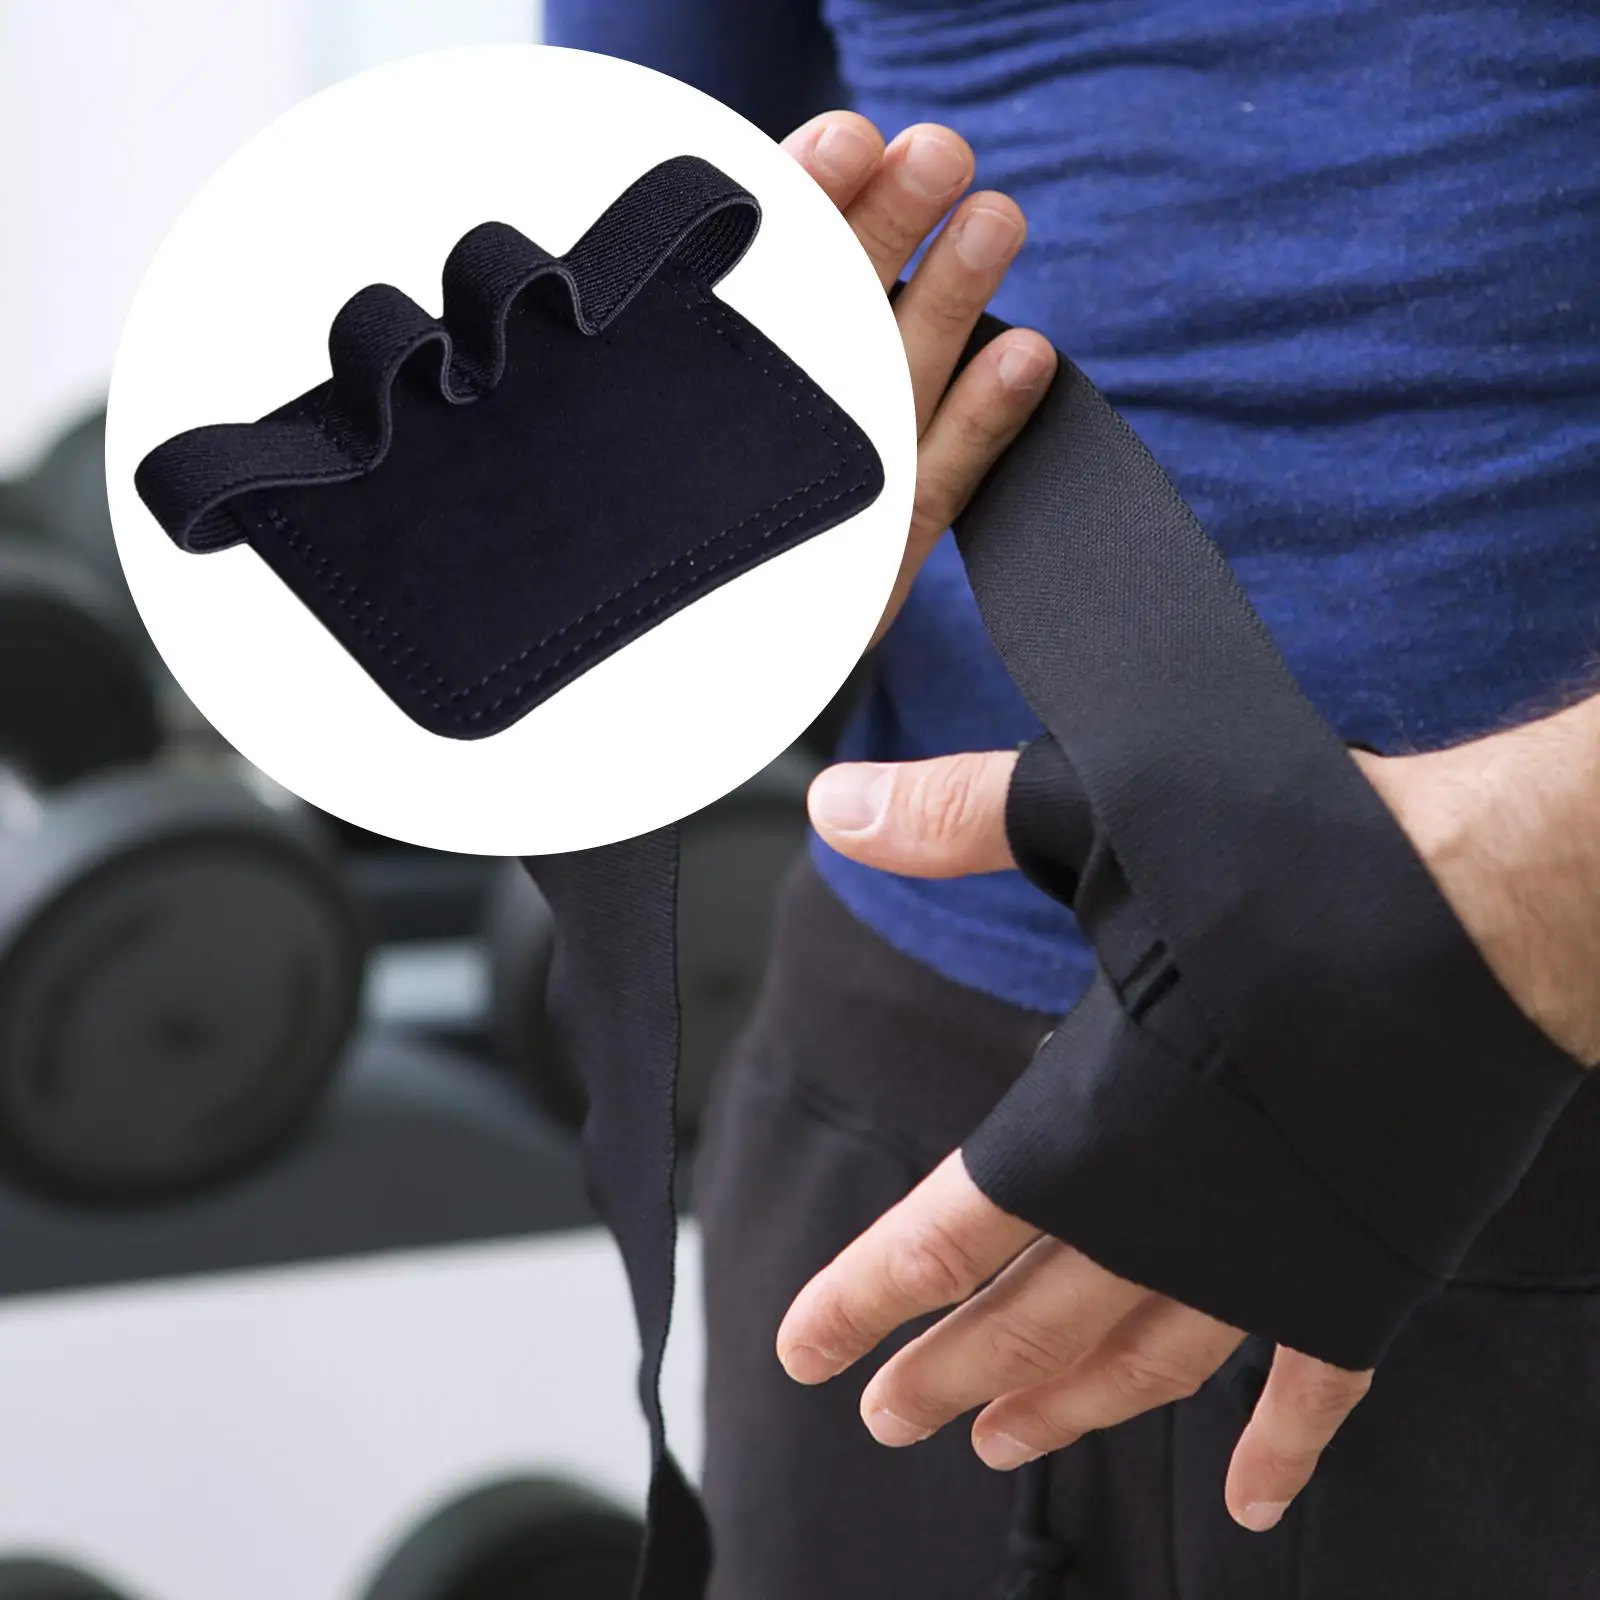 Grip Pad Hand Protector Anti-Slip Avoid Calluses Workout Gloves for Weightlifting Body Building Exercise Fitness Sports Pullup